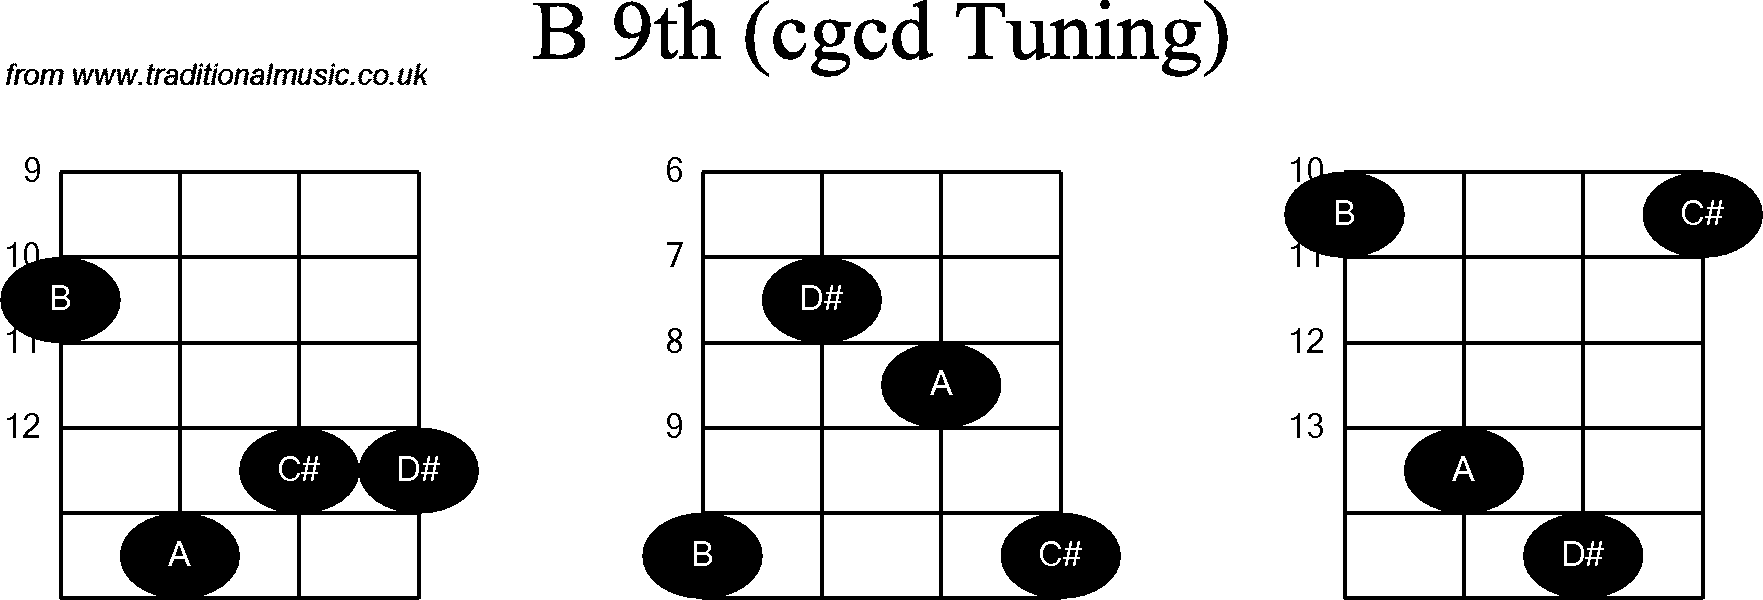 Chord diagrams for Banjo(Double C) B9th